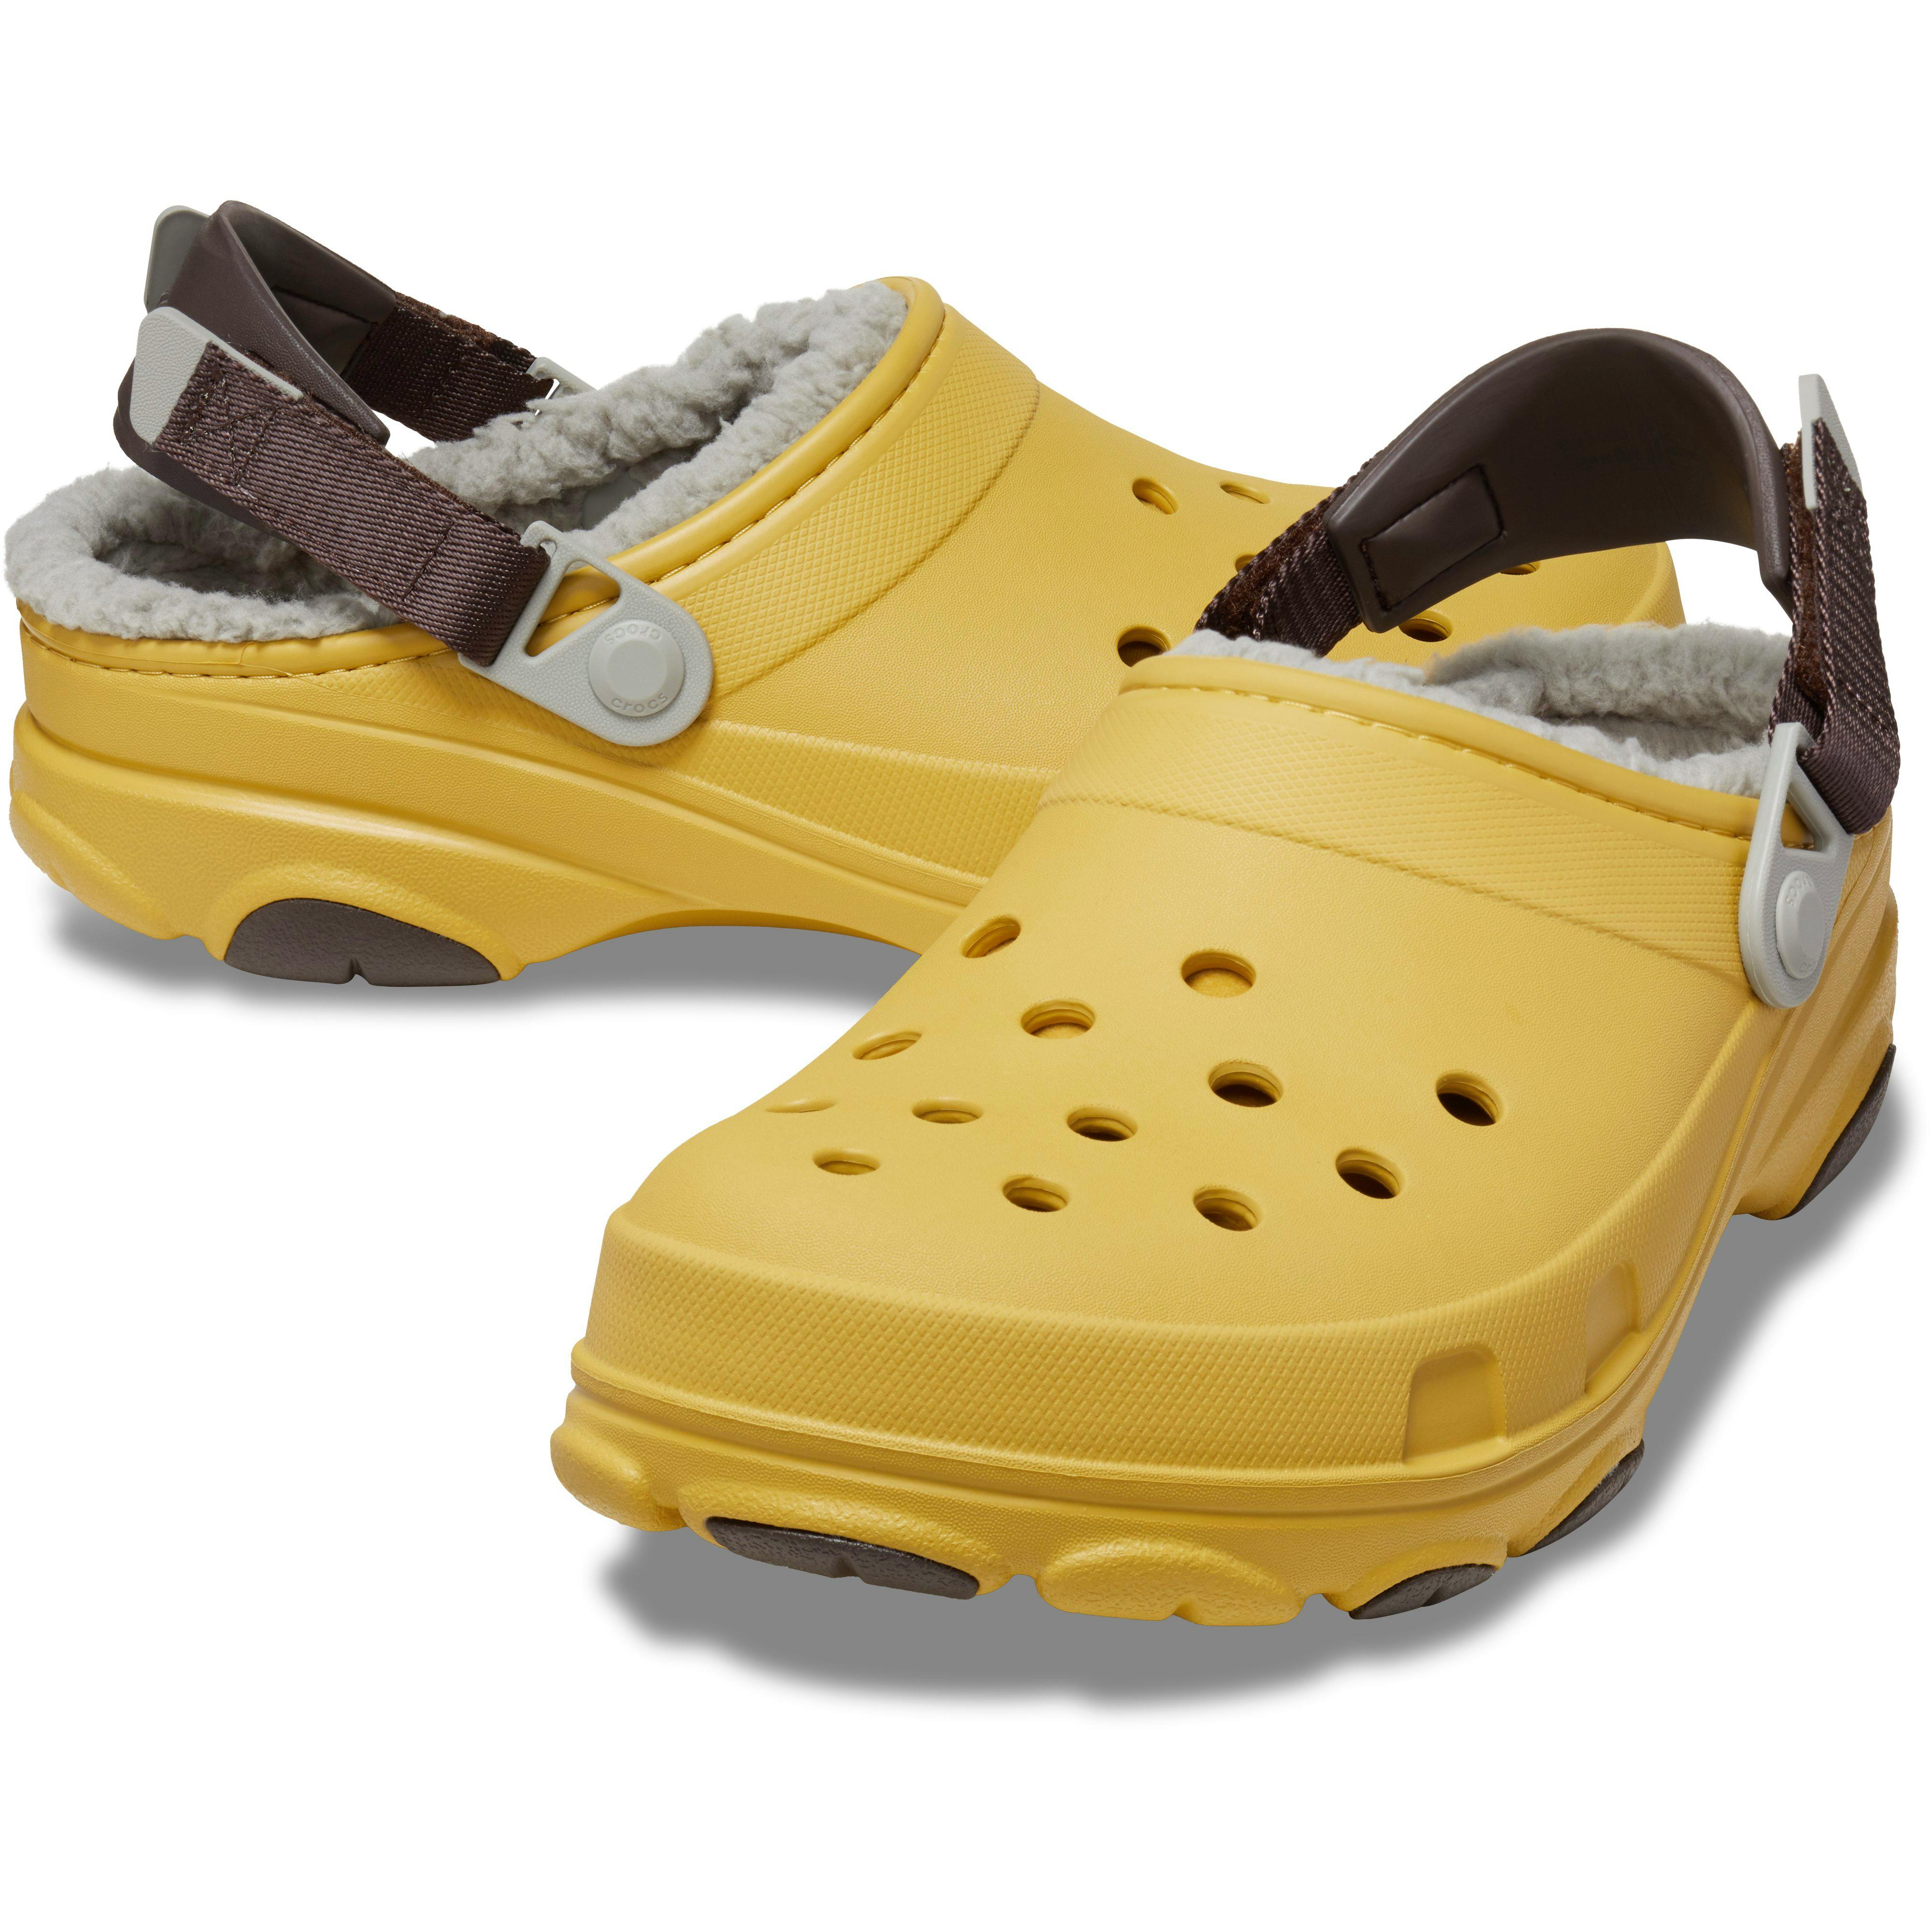 Crocs+Classic+Clog+Comfortable+Slip+on+Casual+Water+Shoe+Grass+